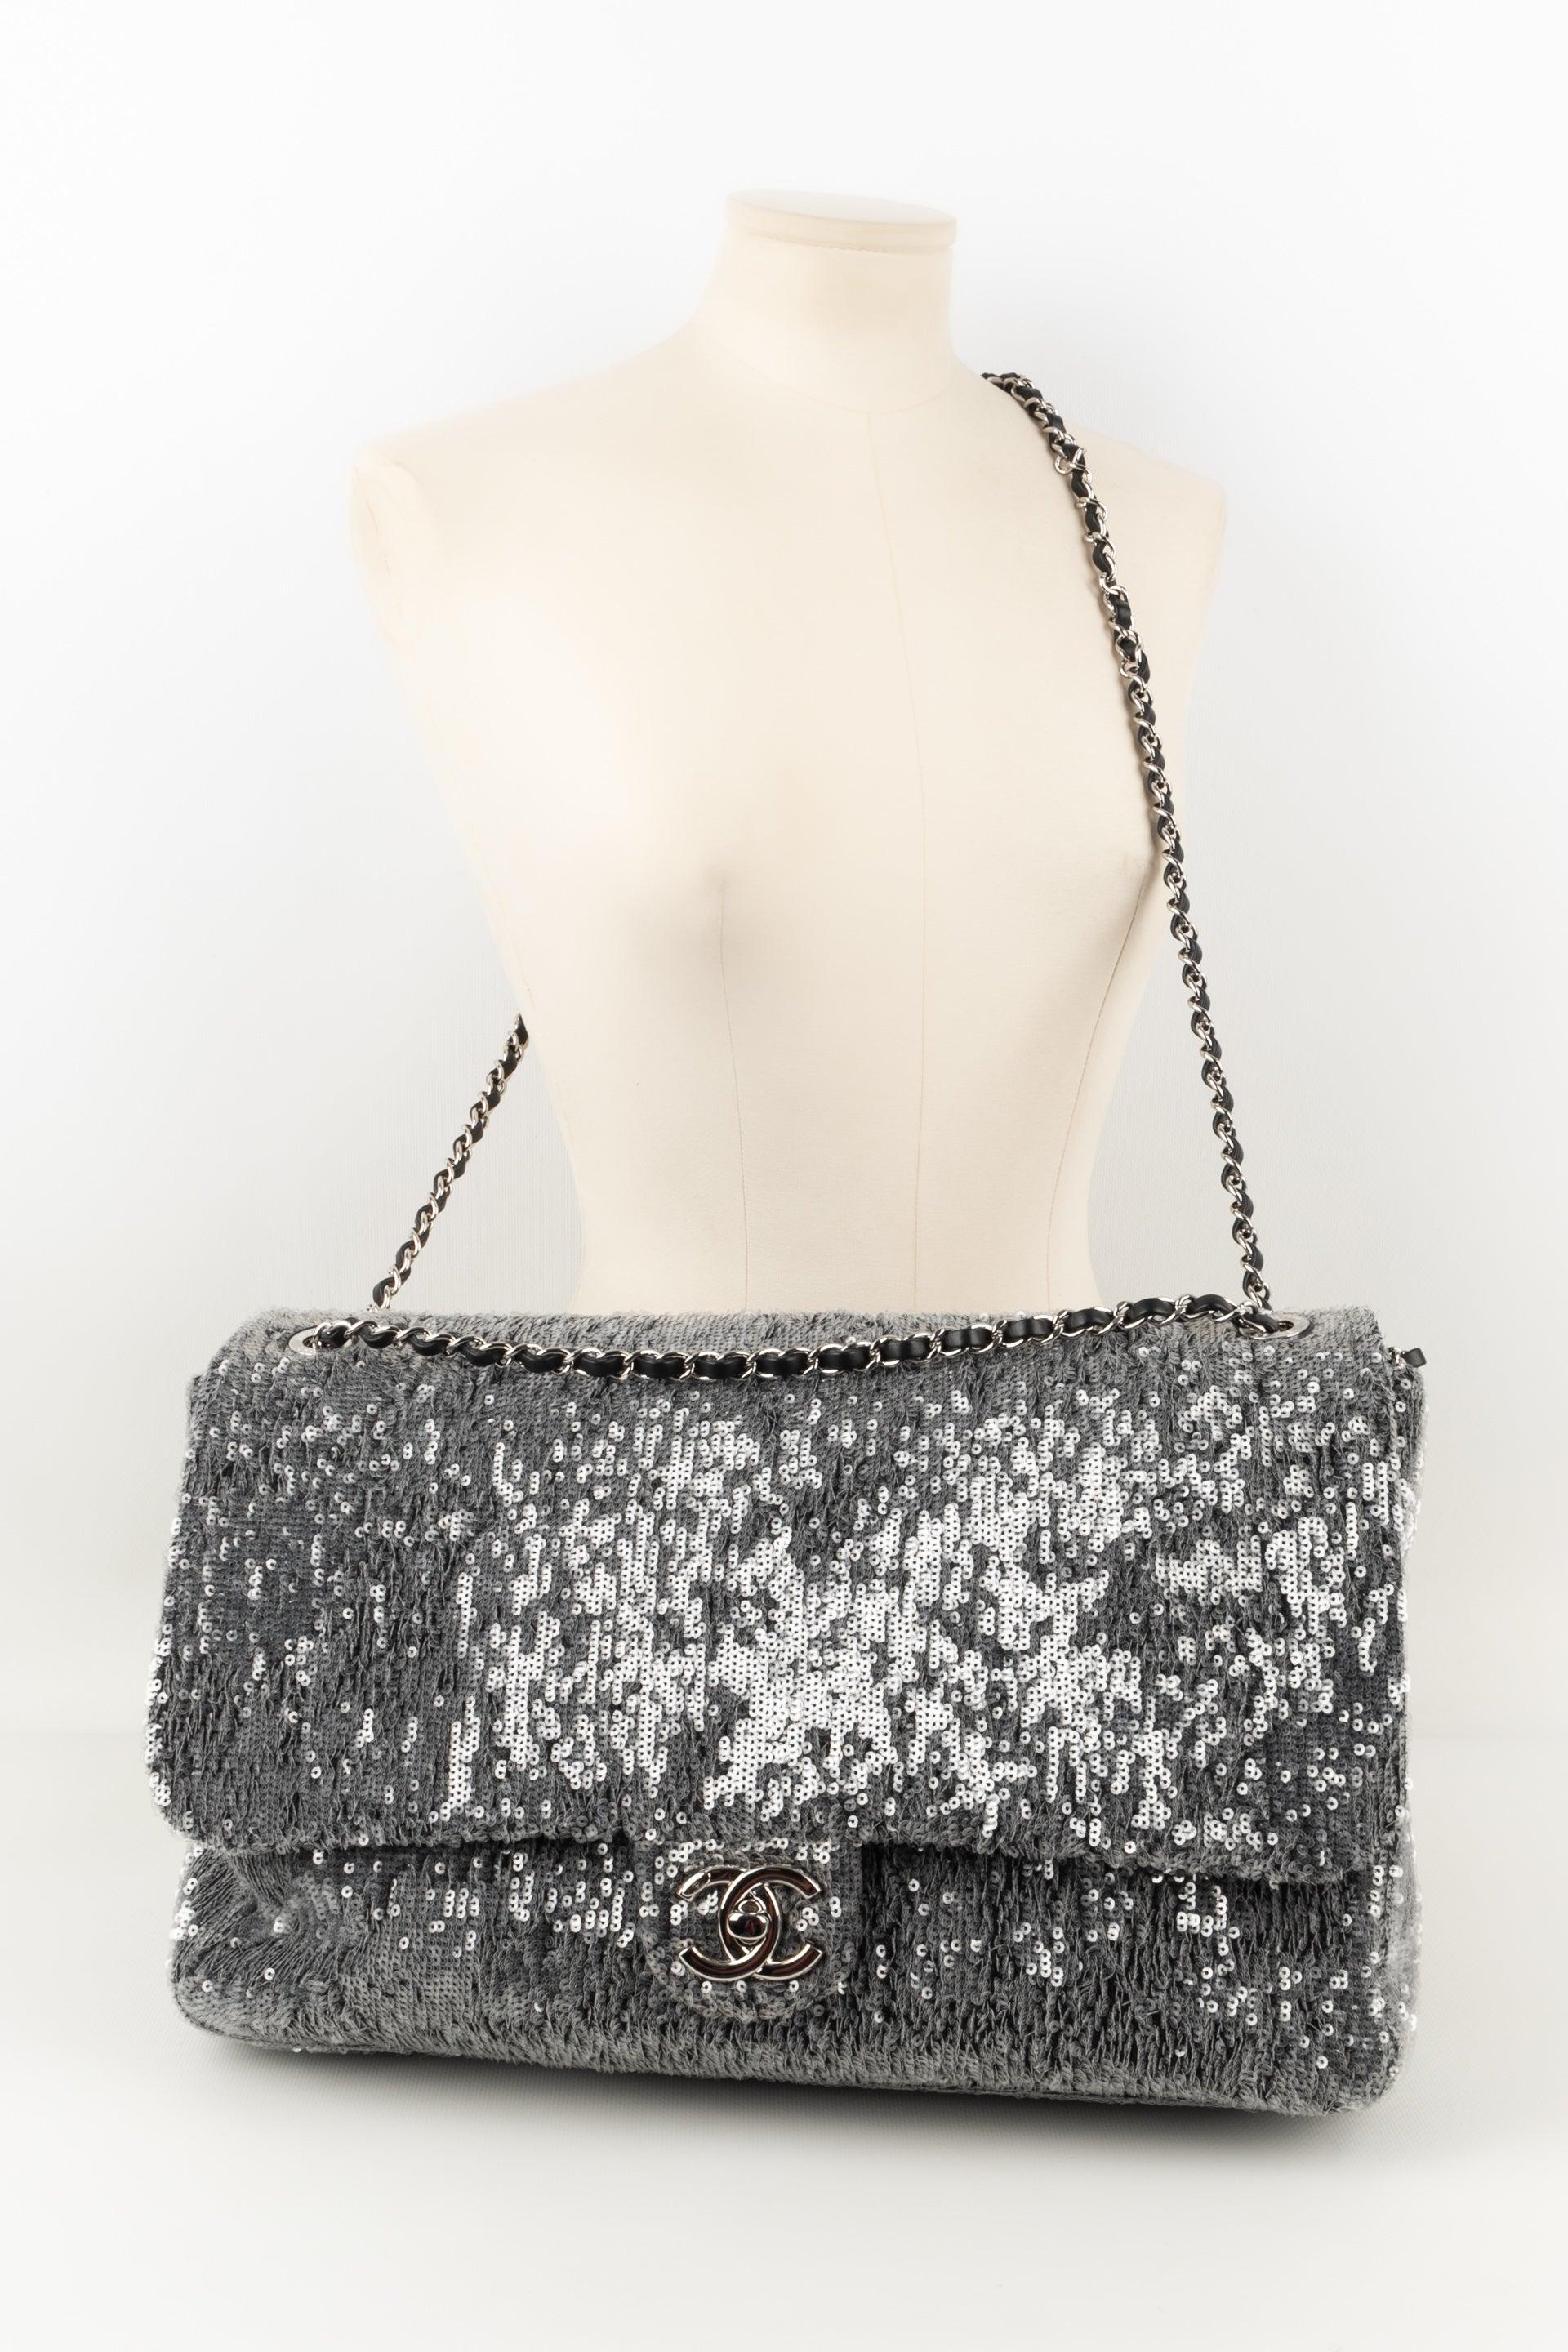 Chanel - (Made in Italy) Leather bag with grey sequins. Silvery metal elements. Sold with its serial number. 2018/2019 Collection. Bag from private sales.

Additional information:
Condition: Very good condition
Dimensions: Length: 38 cm - Height: 24